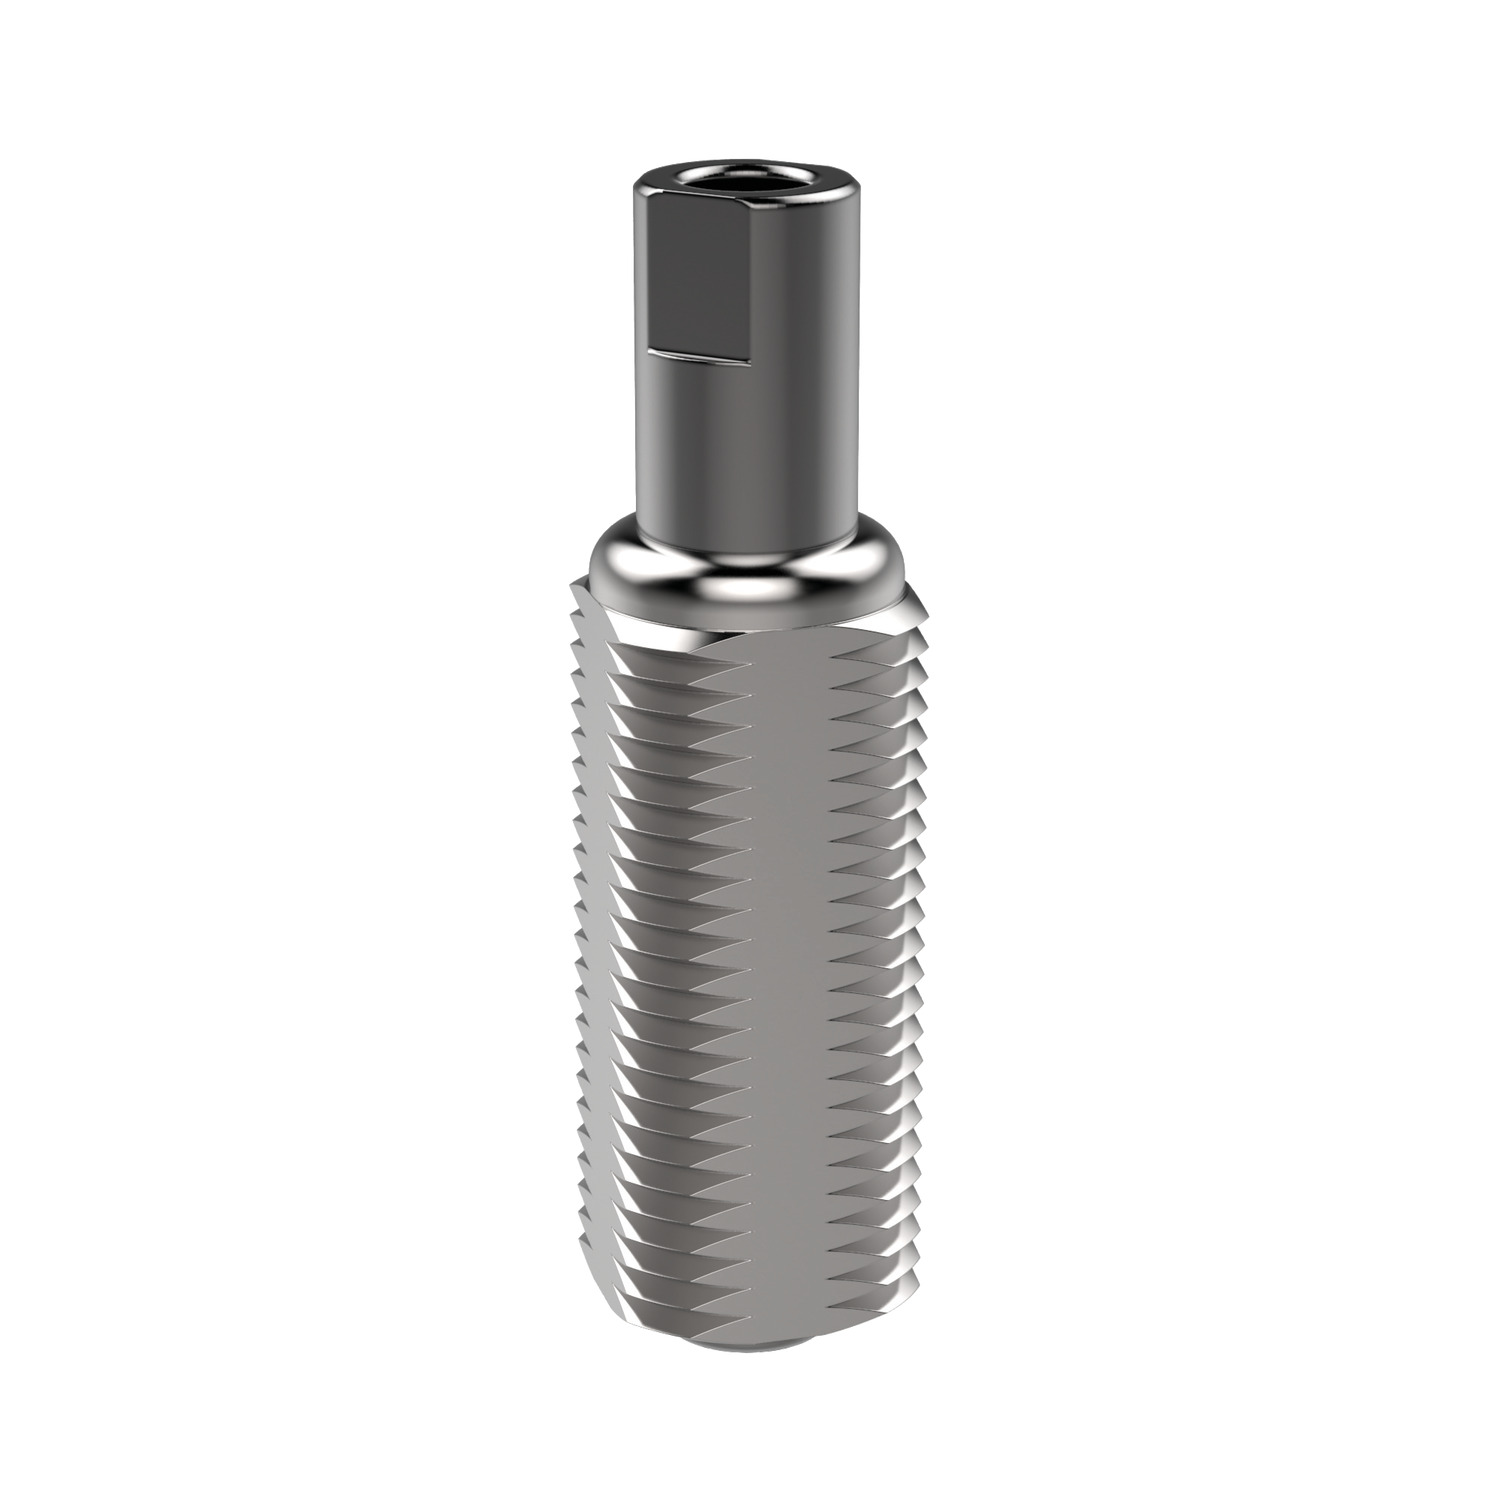 Index plungers - Push-Pull Non-locking steel index plunger. Ideal for either pressure (push) or tension (pull) applications, due to the uniquely designed spring loaded pin with threads at both ends to allow installation of your own adapted or handle.